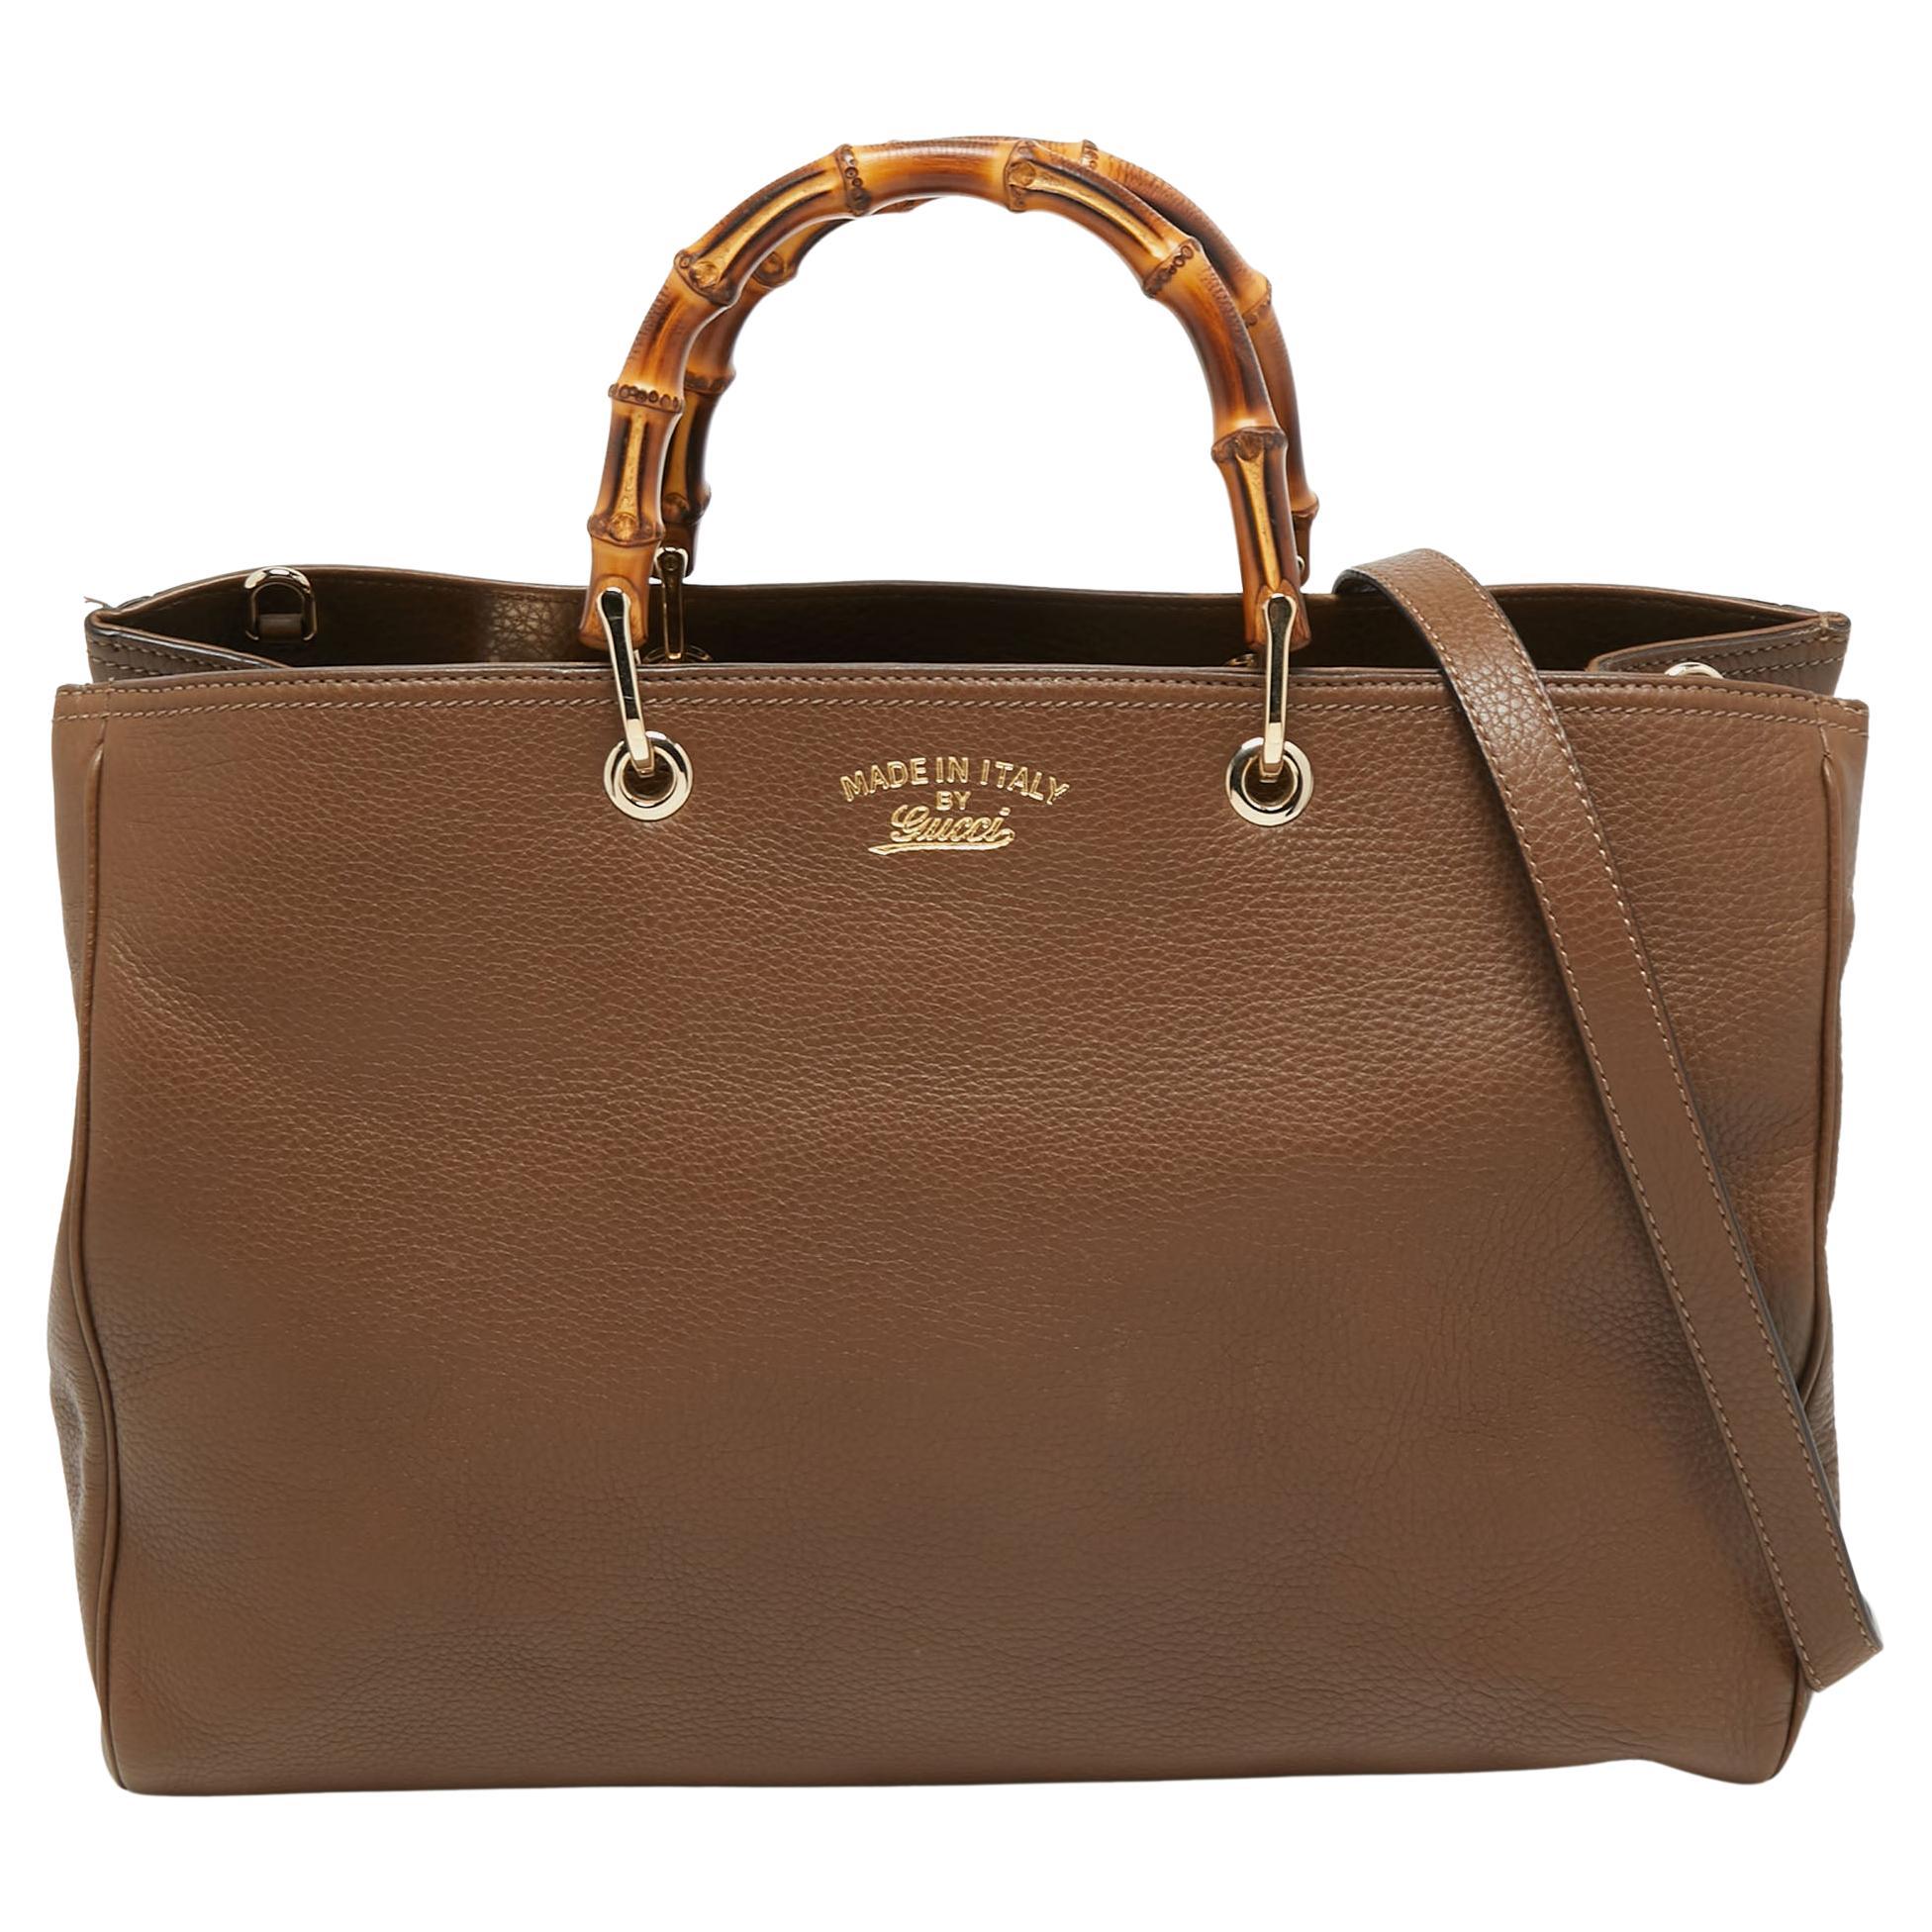 Gucci Brown Leather Large Bamboo Shopper Tote